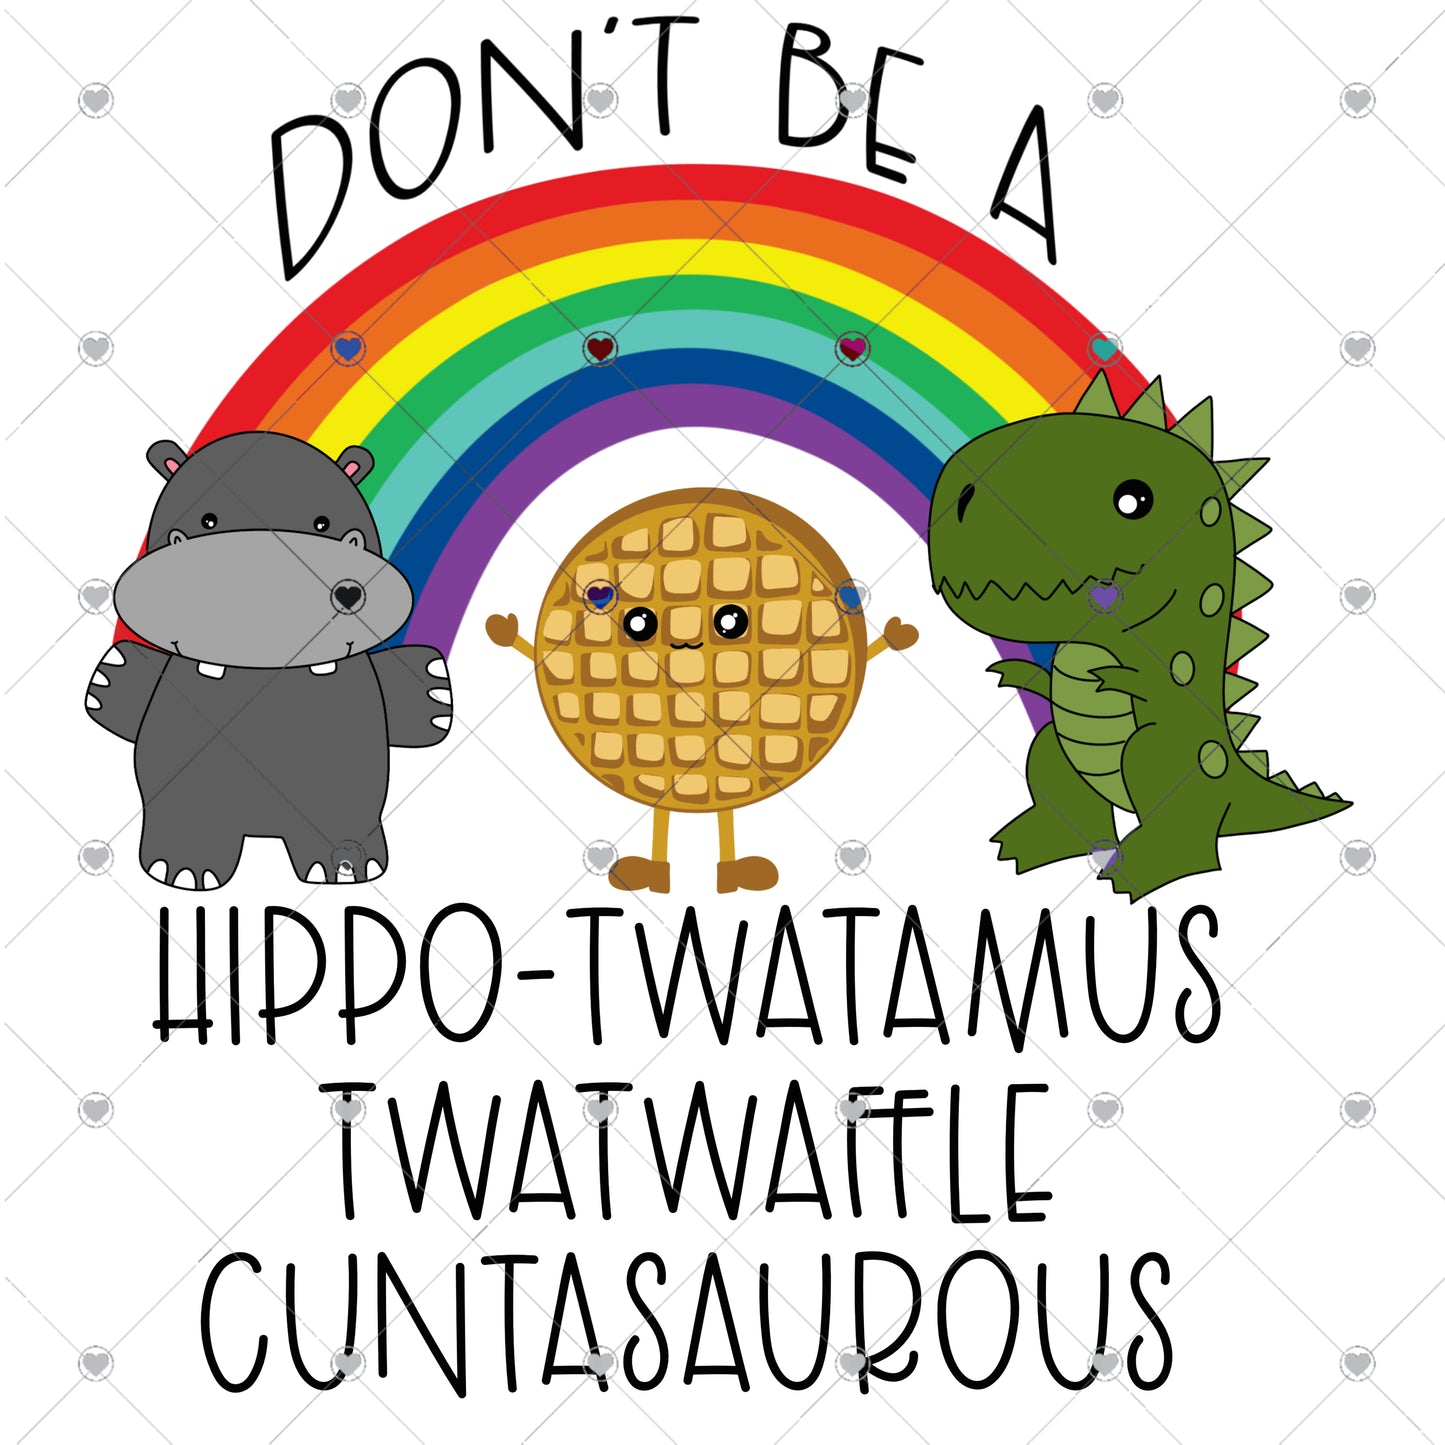 Don't Be A Hippo-Twatamus Twatwaffle Cuntasaurous Ready To Press Sublimation Transfer